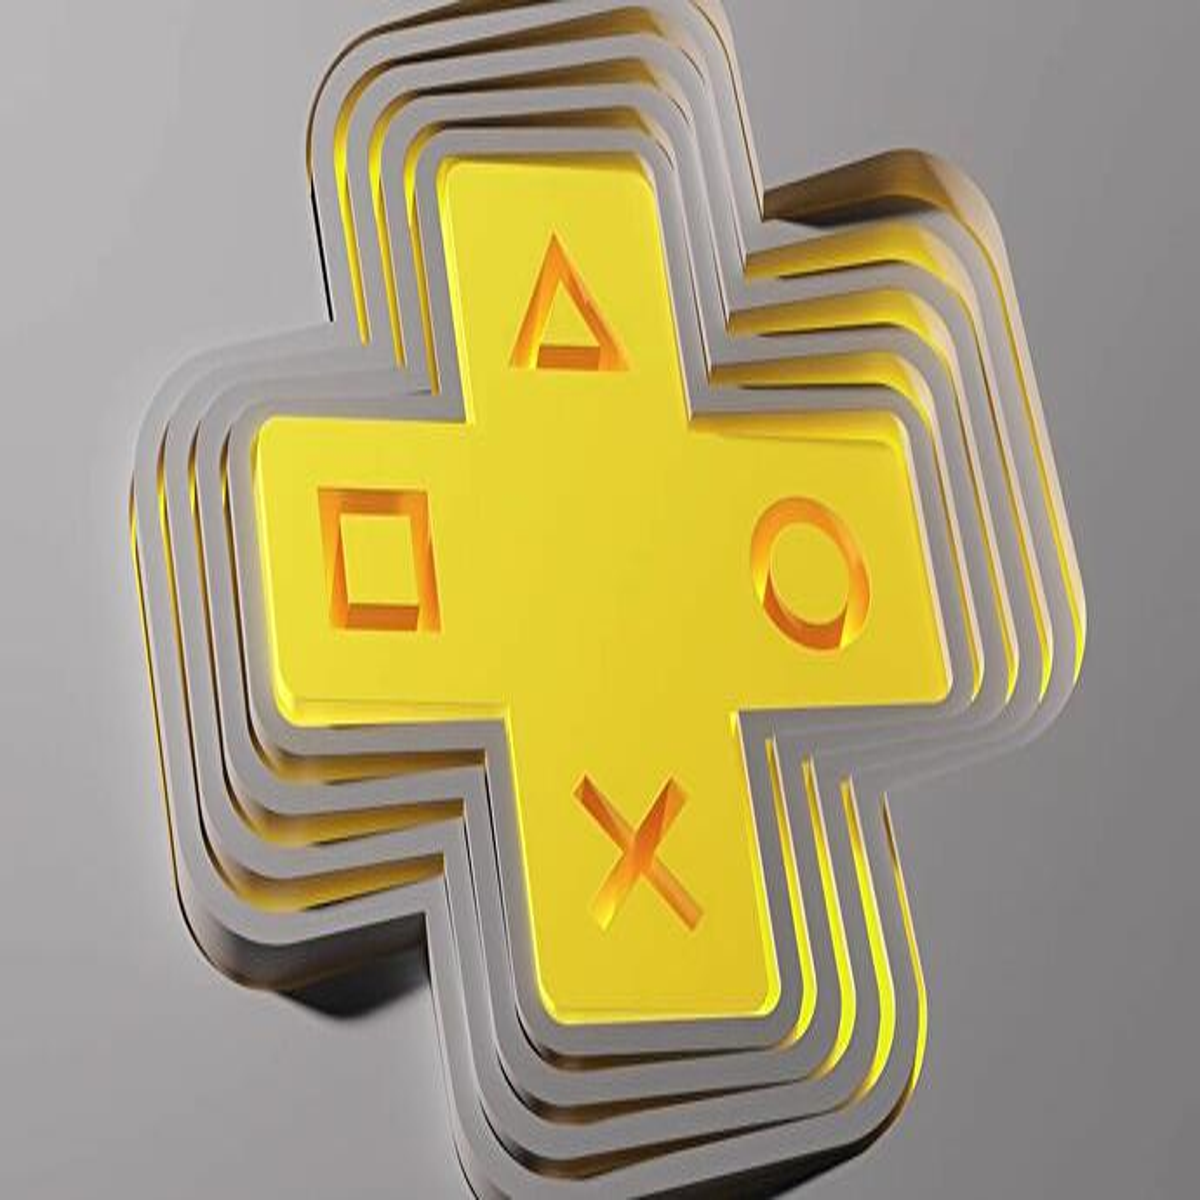 PlayStation Plus Explained - The Ultimate Guide to PS Plus 